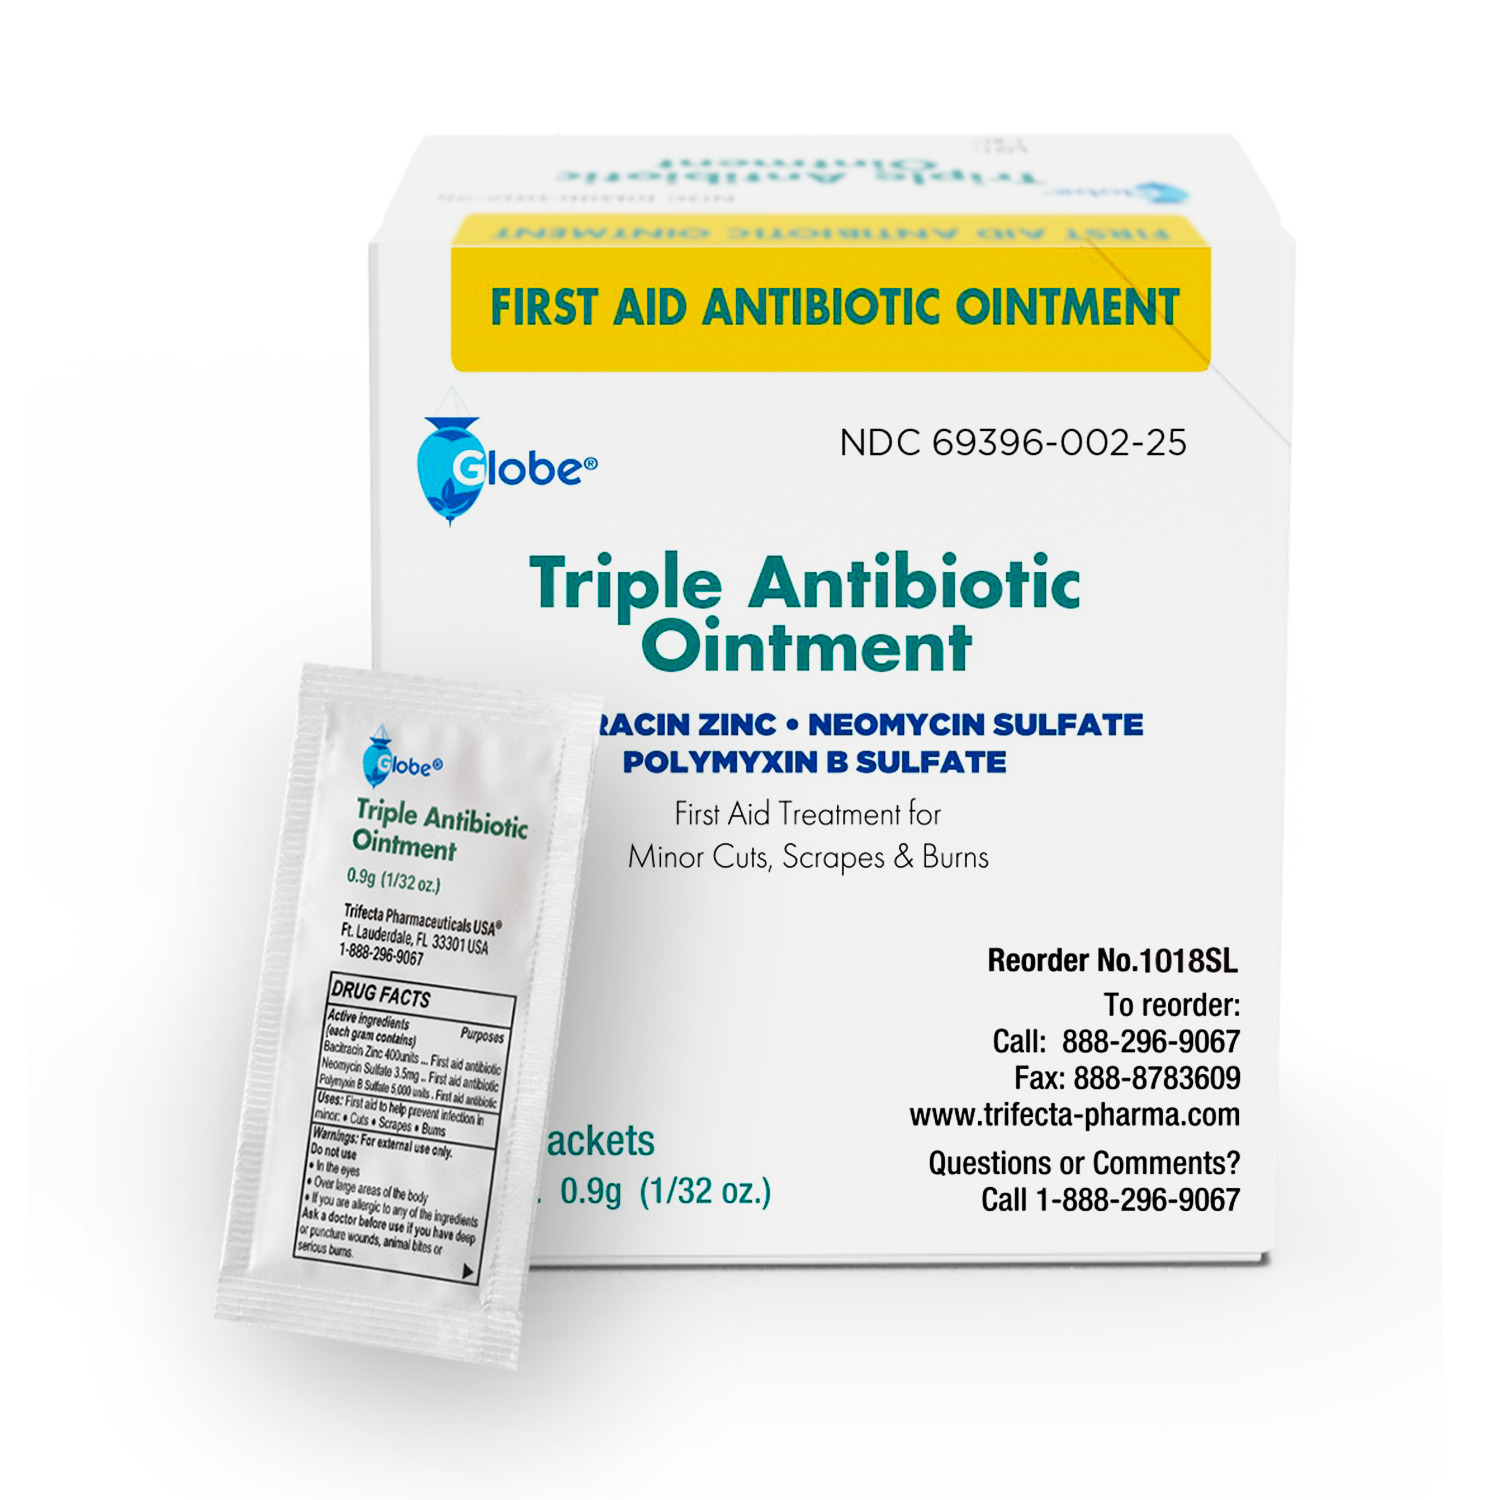 Globe Triple Antibiotic Ointment 0.9g Single Packets. (25 Single Packets)